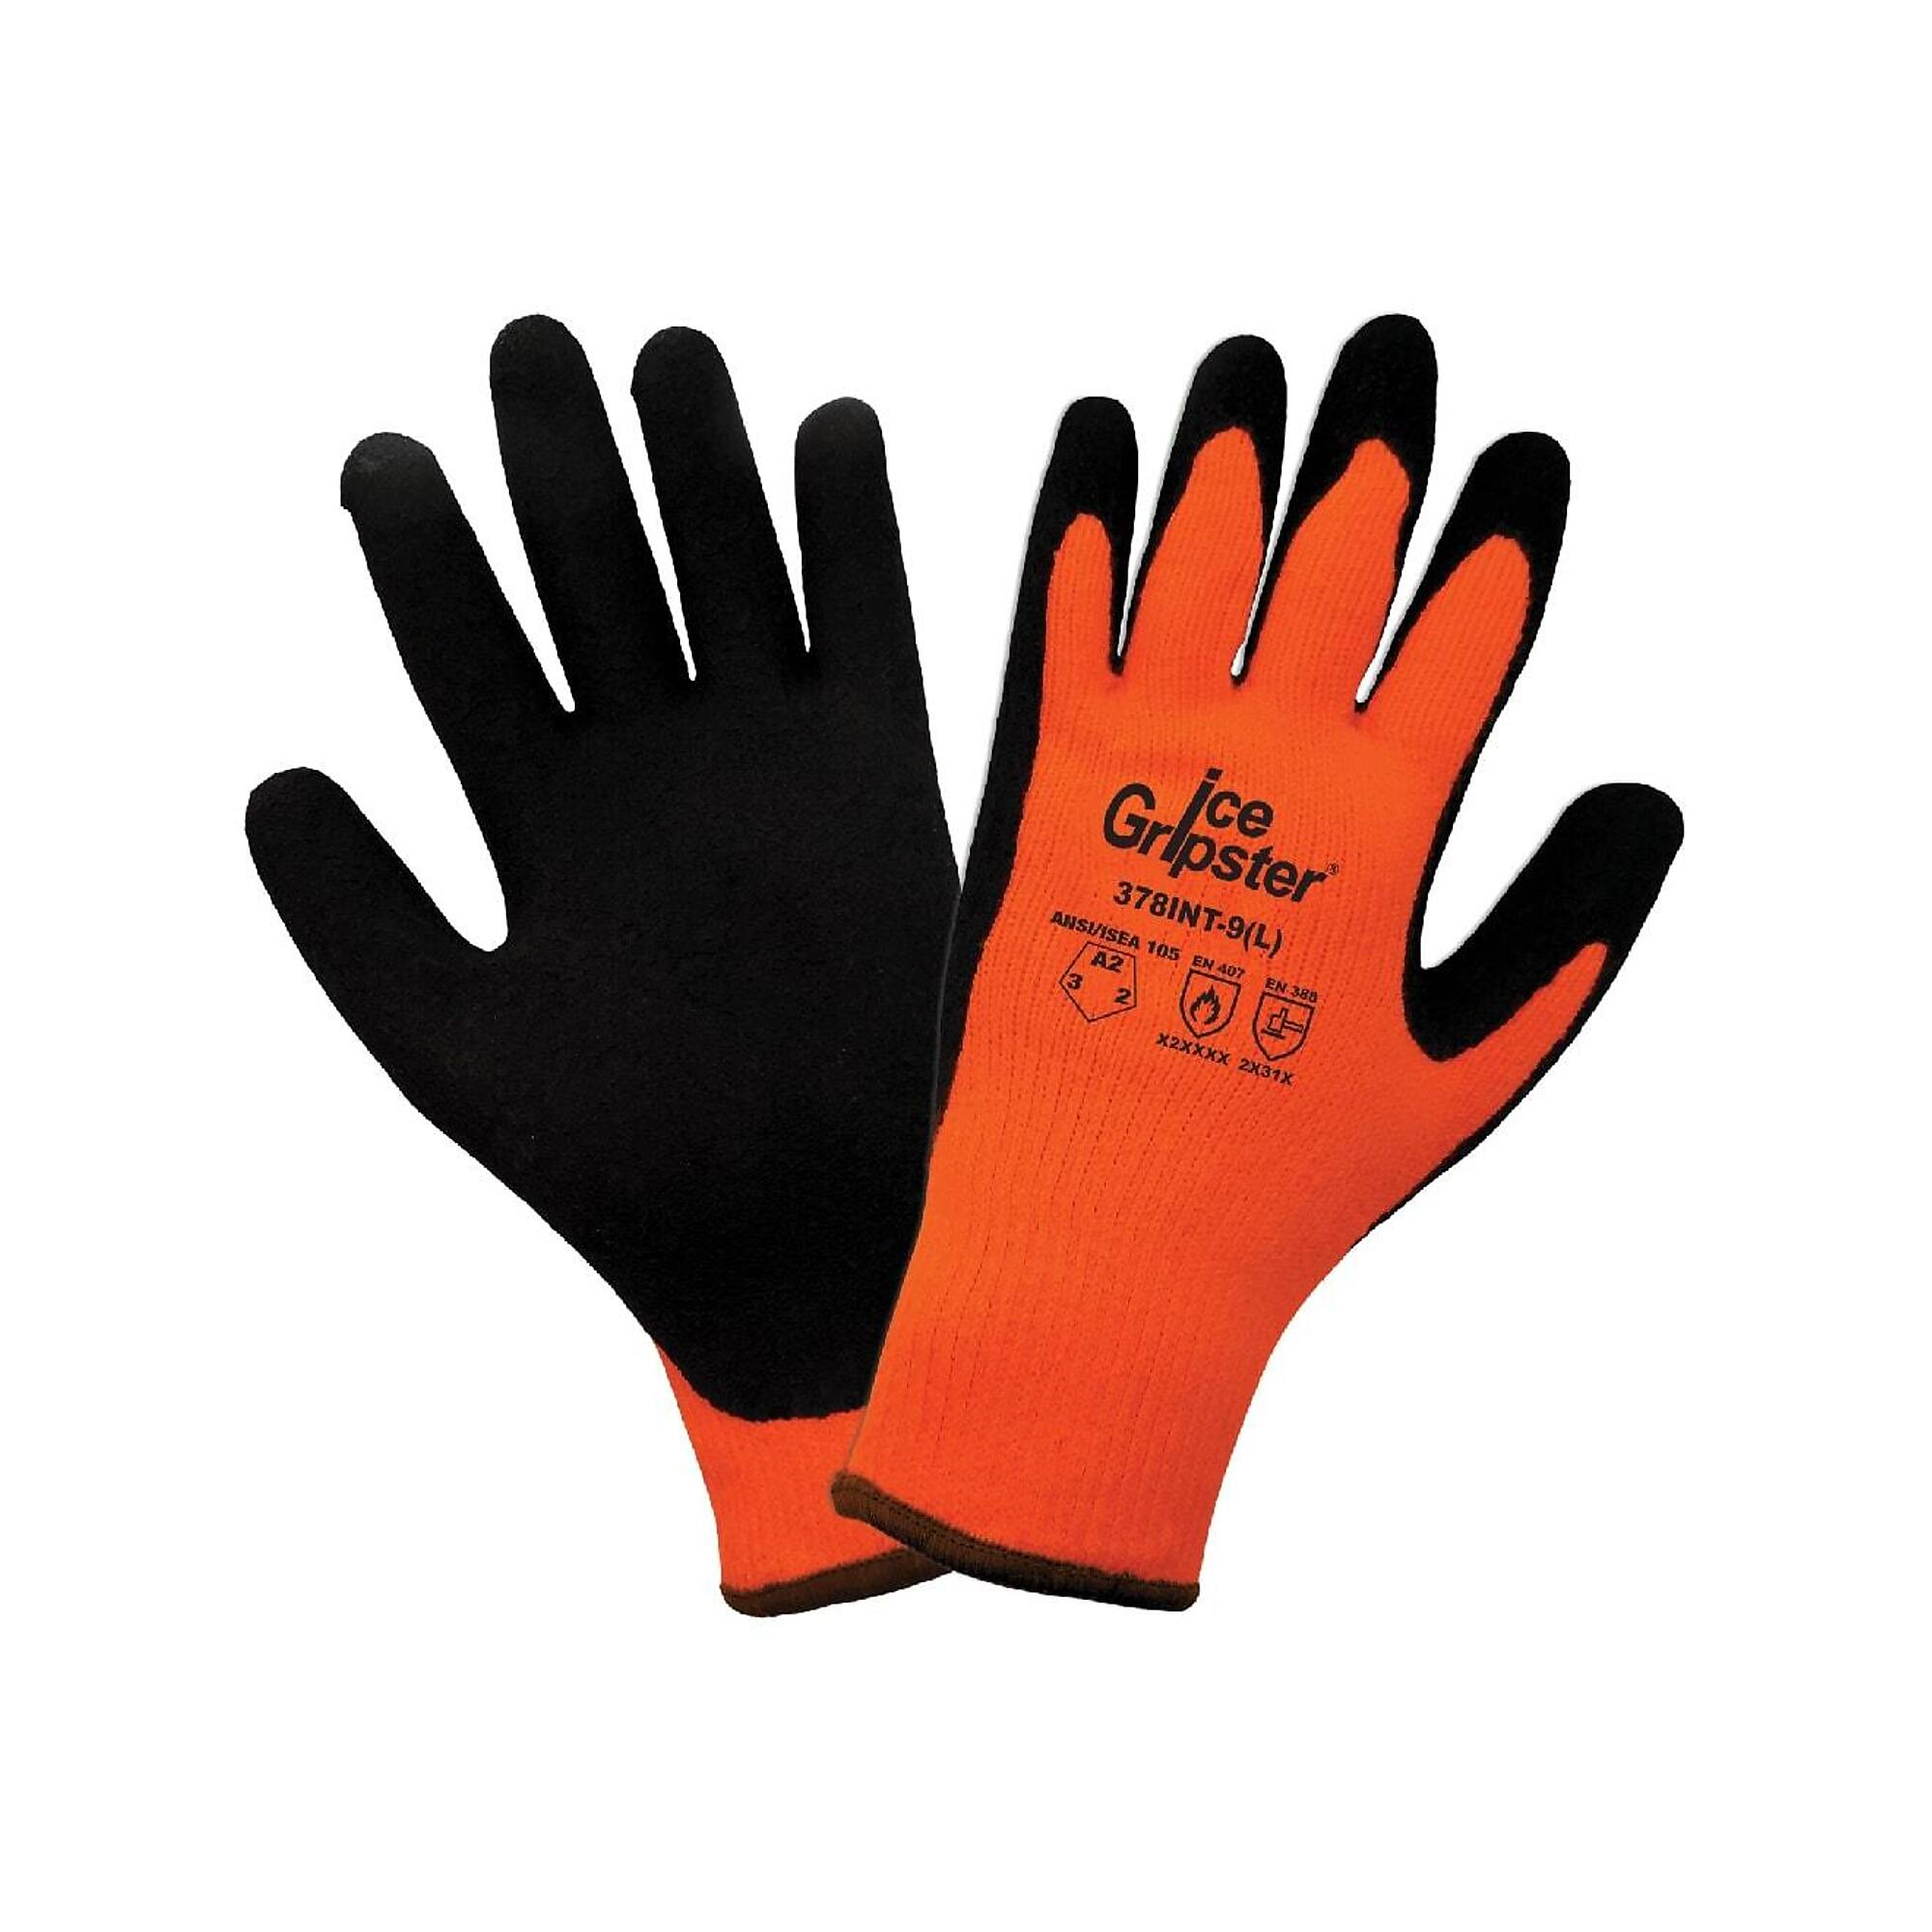 Global Glove Ice Gripster , HV Orange,Insulated Rub Coat, Cut Resist A2 Gloves-12 Pairs, Size XL, Color Orange/Black, Included (qty.) 12 Model 378INT-